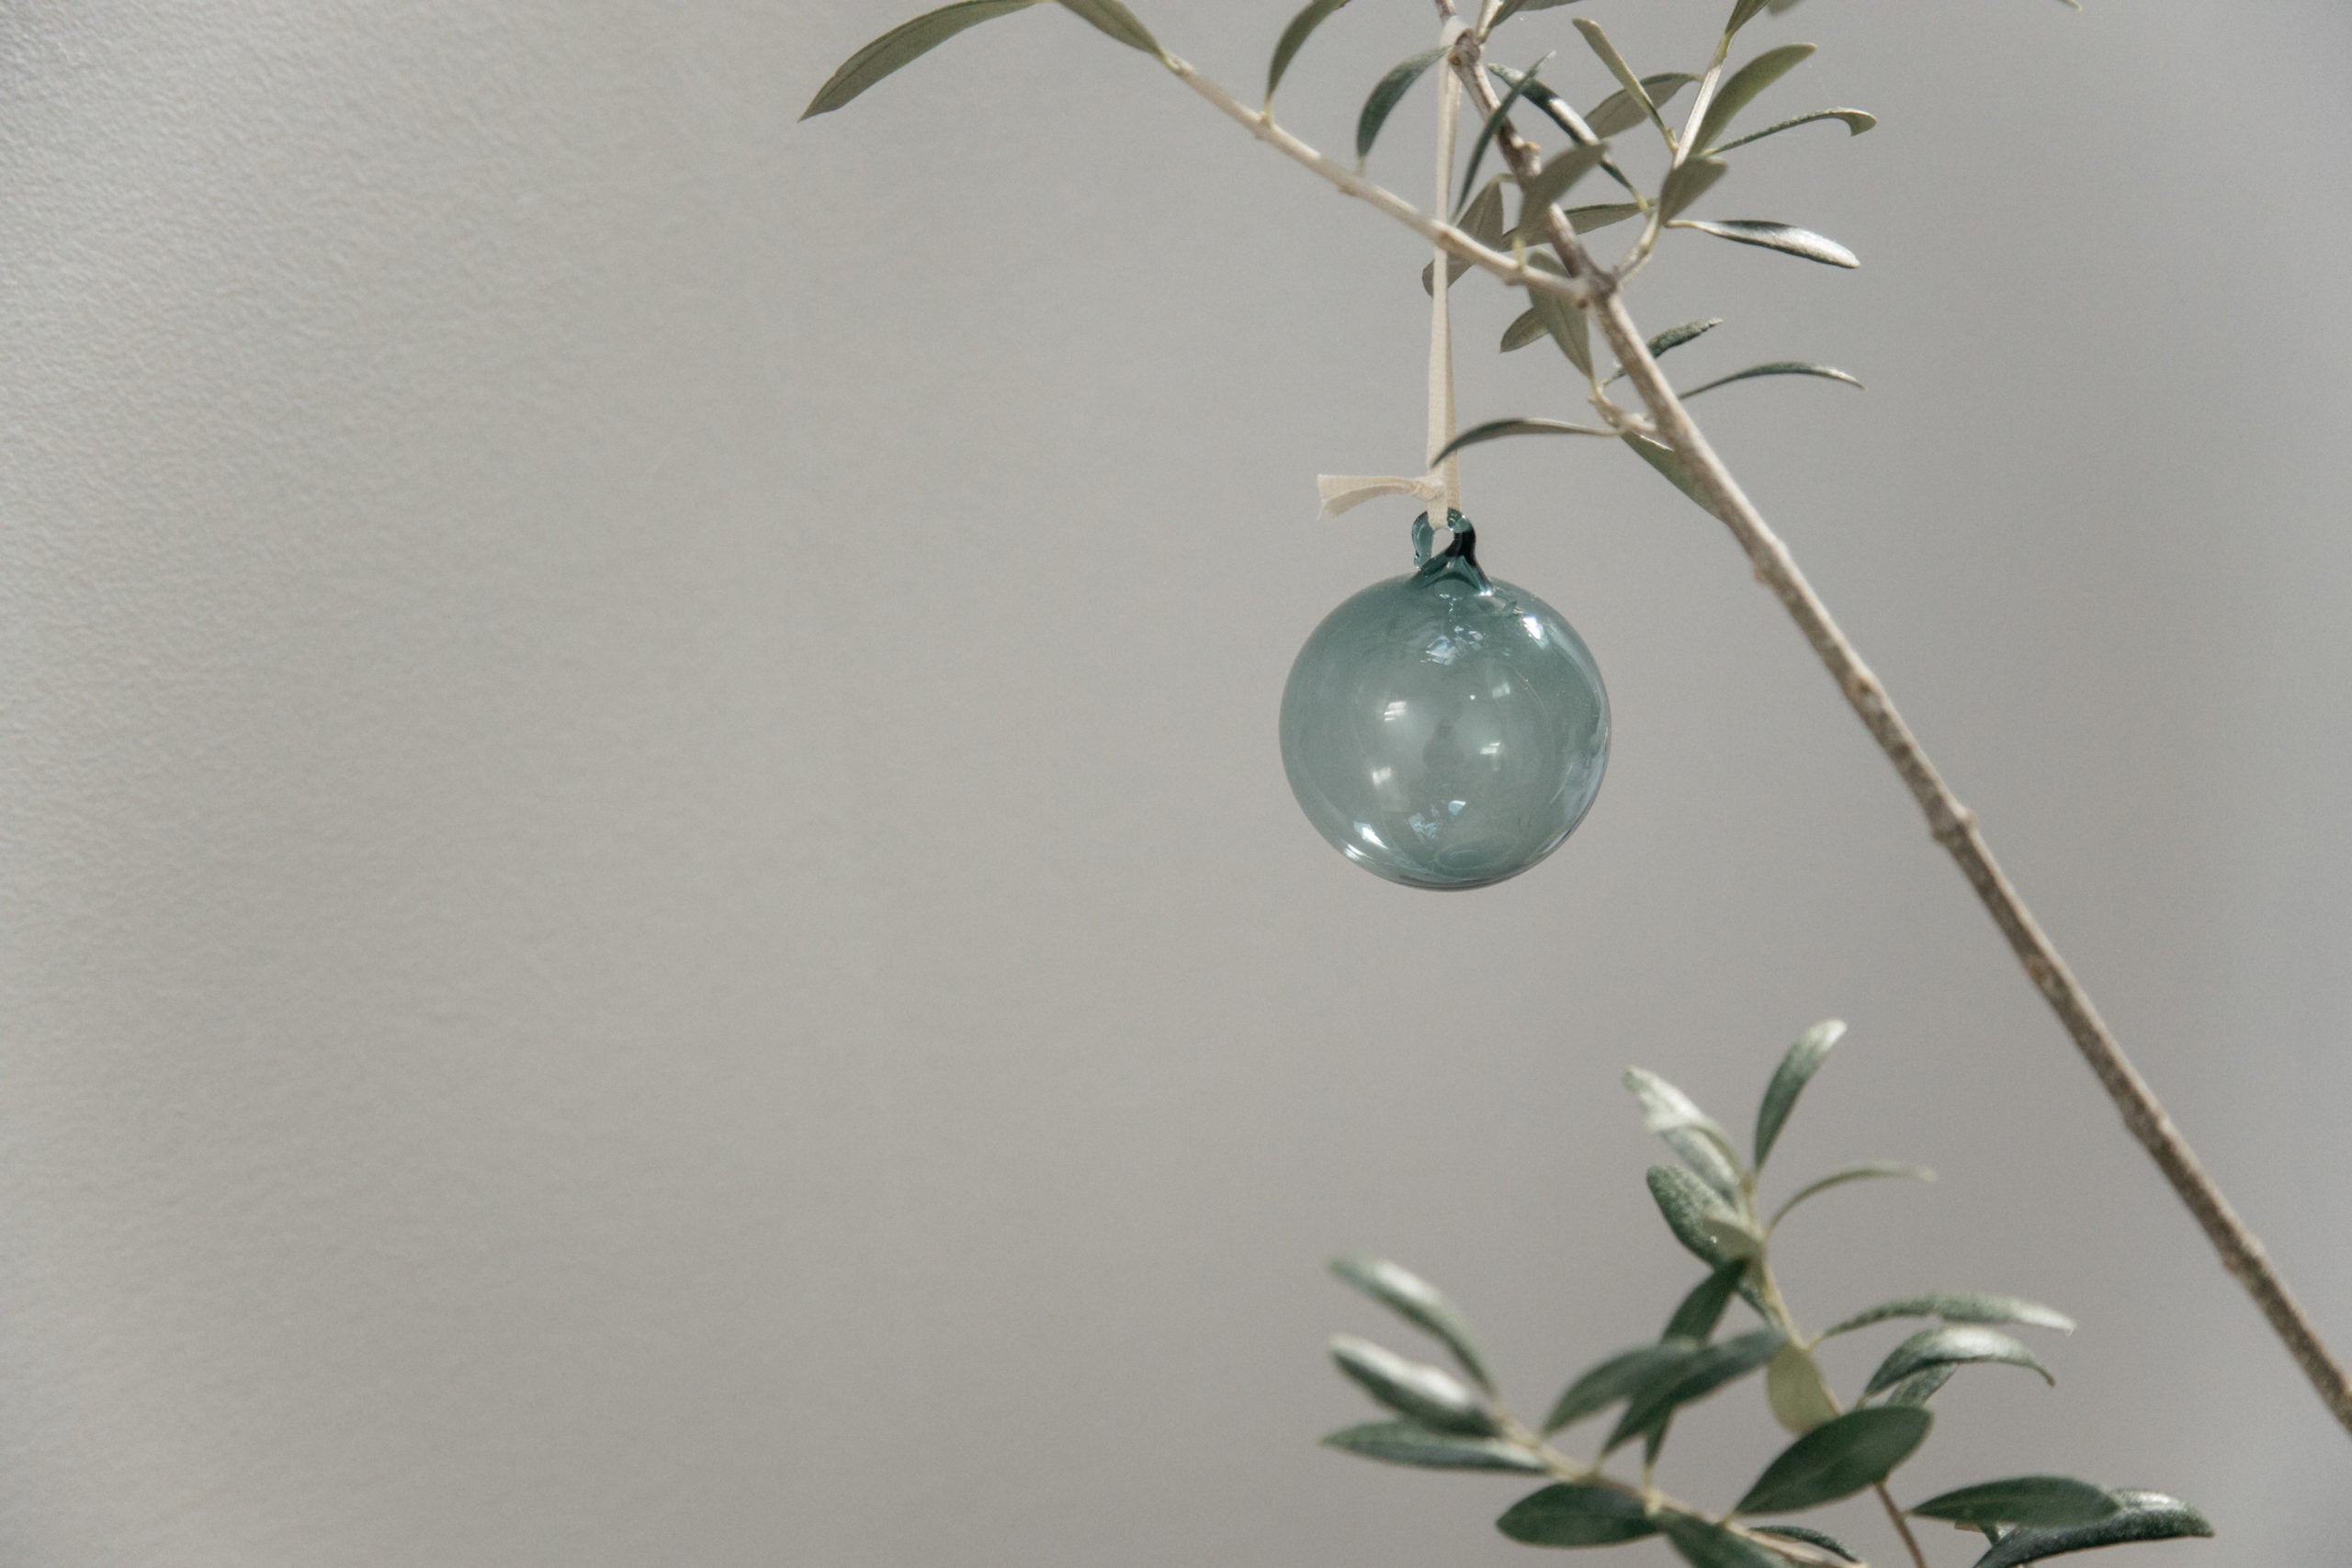 Heirloom Ornaments: A Collection to Pass Down